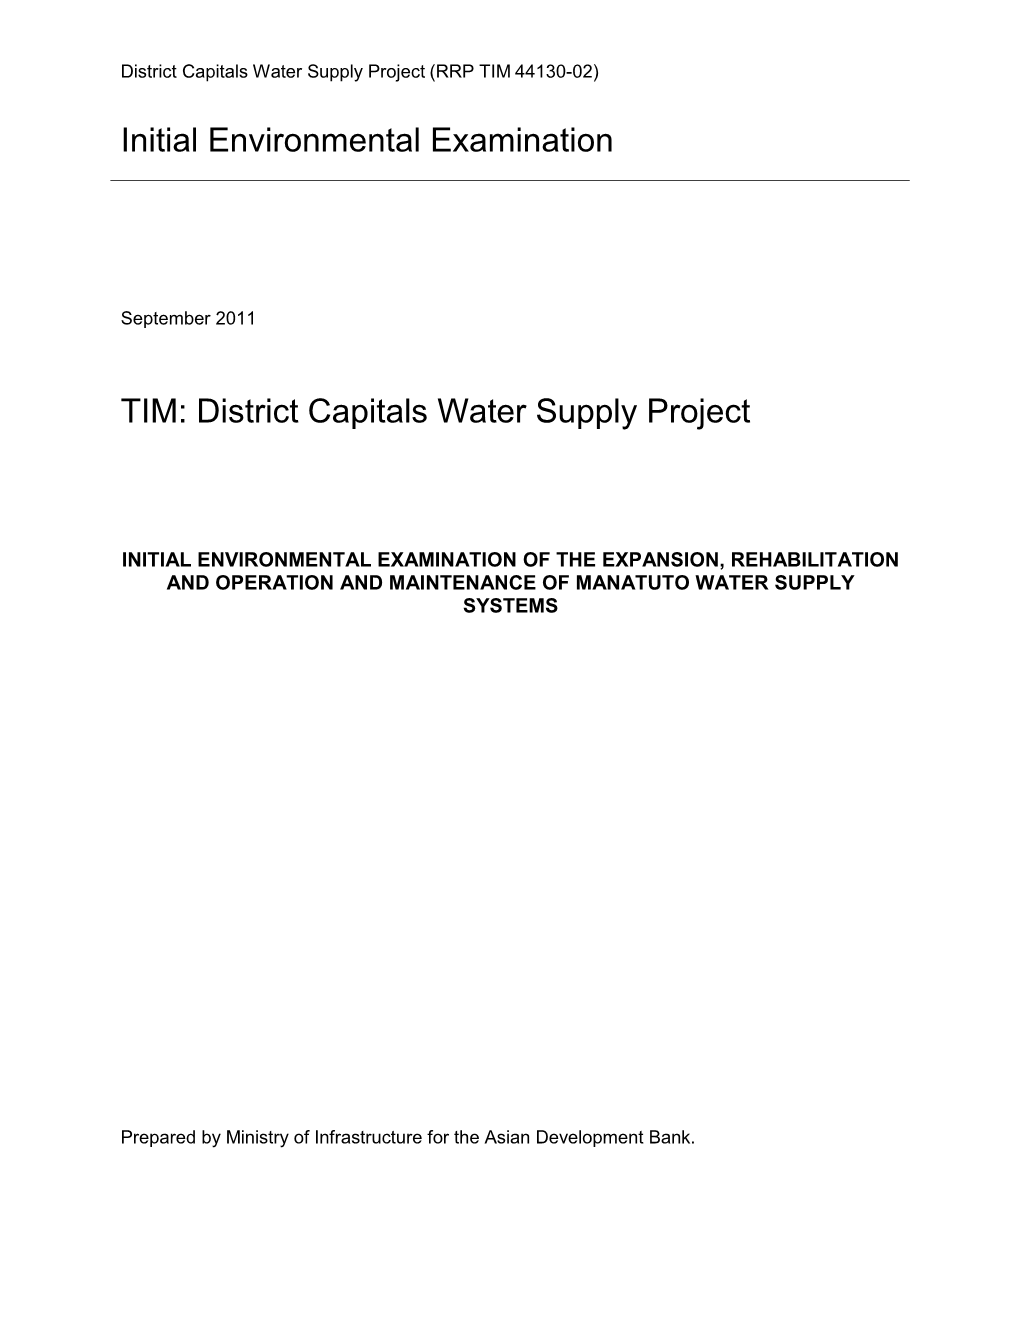 IEE: Timor-Leste: Manatuto Water Supply Systems, District Capitals